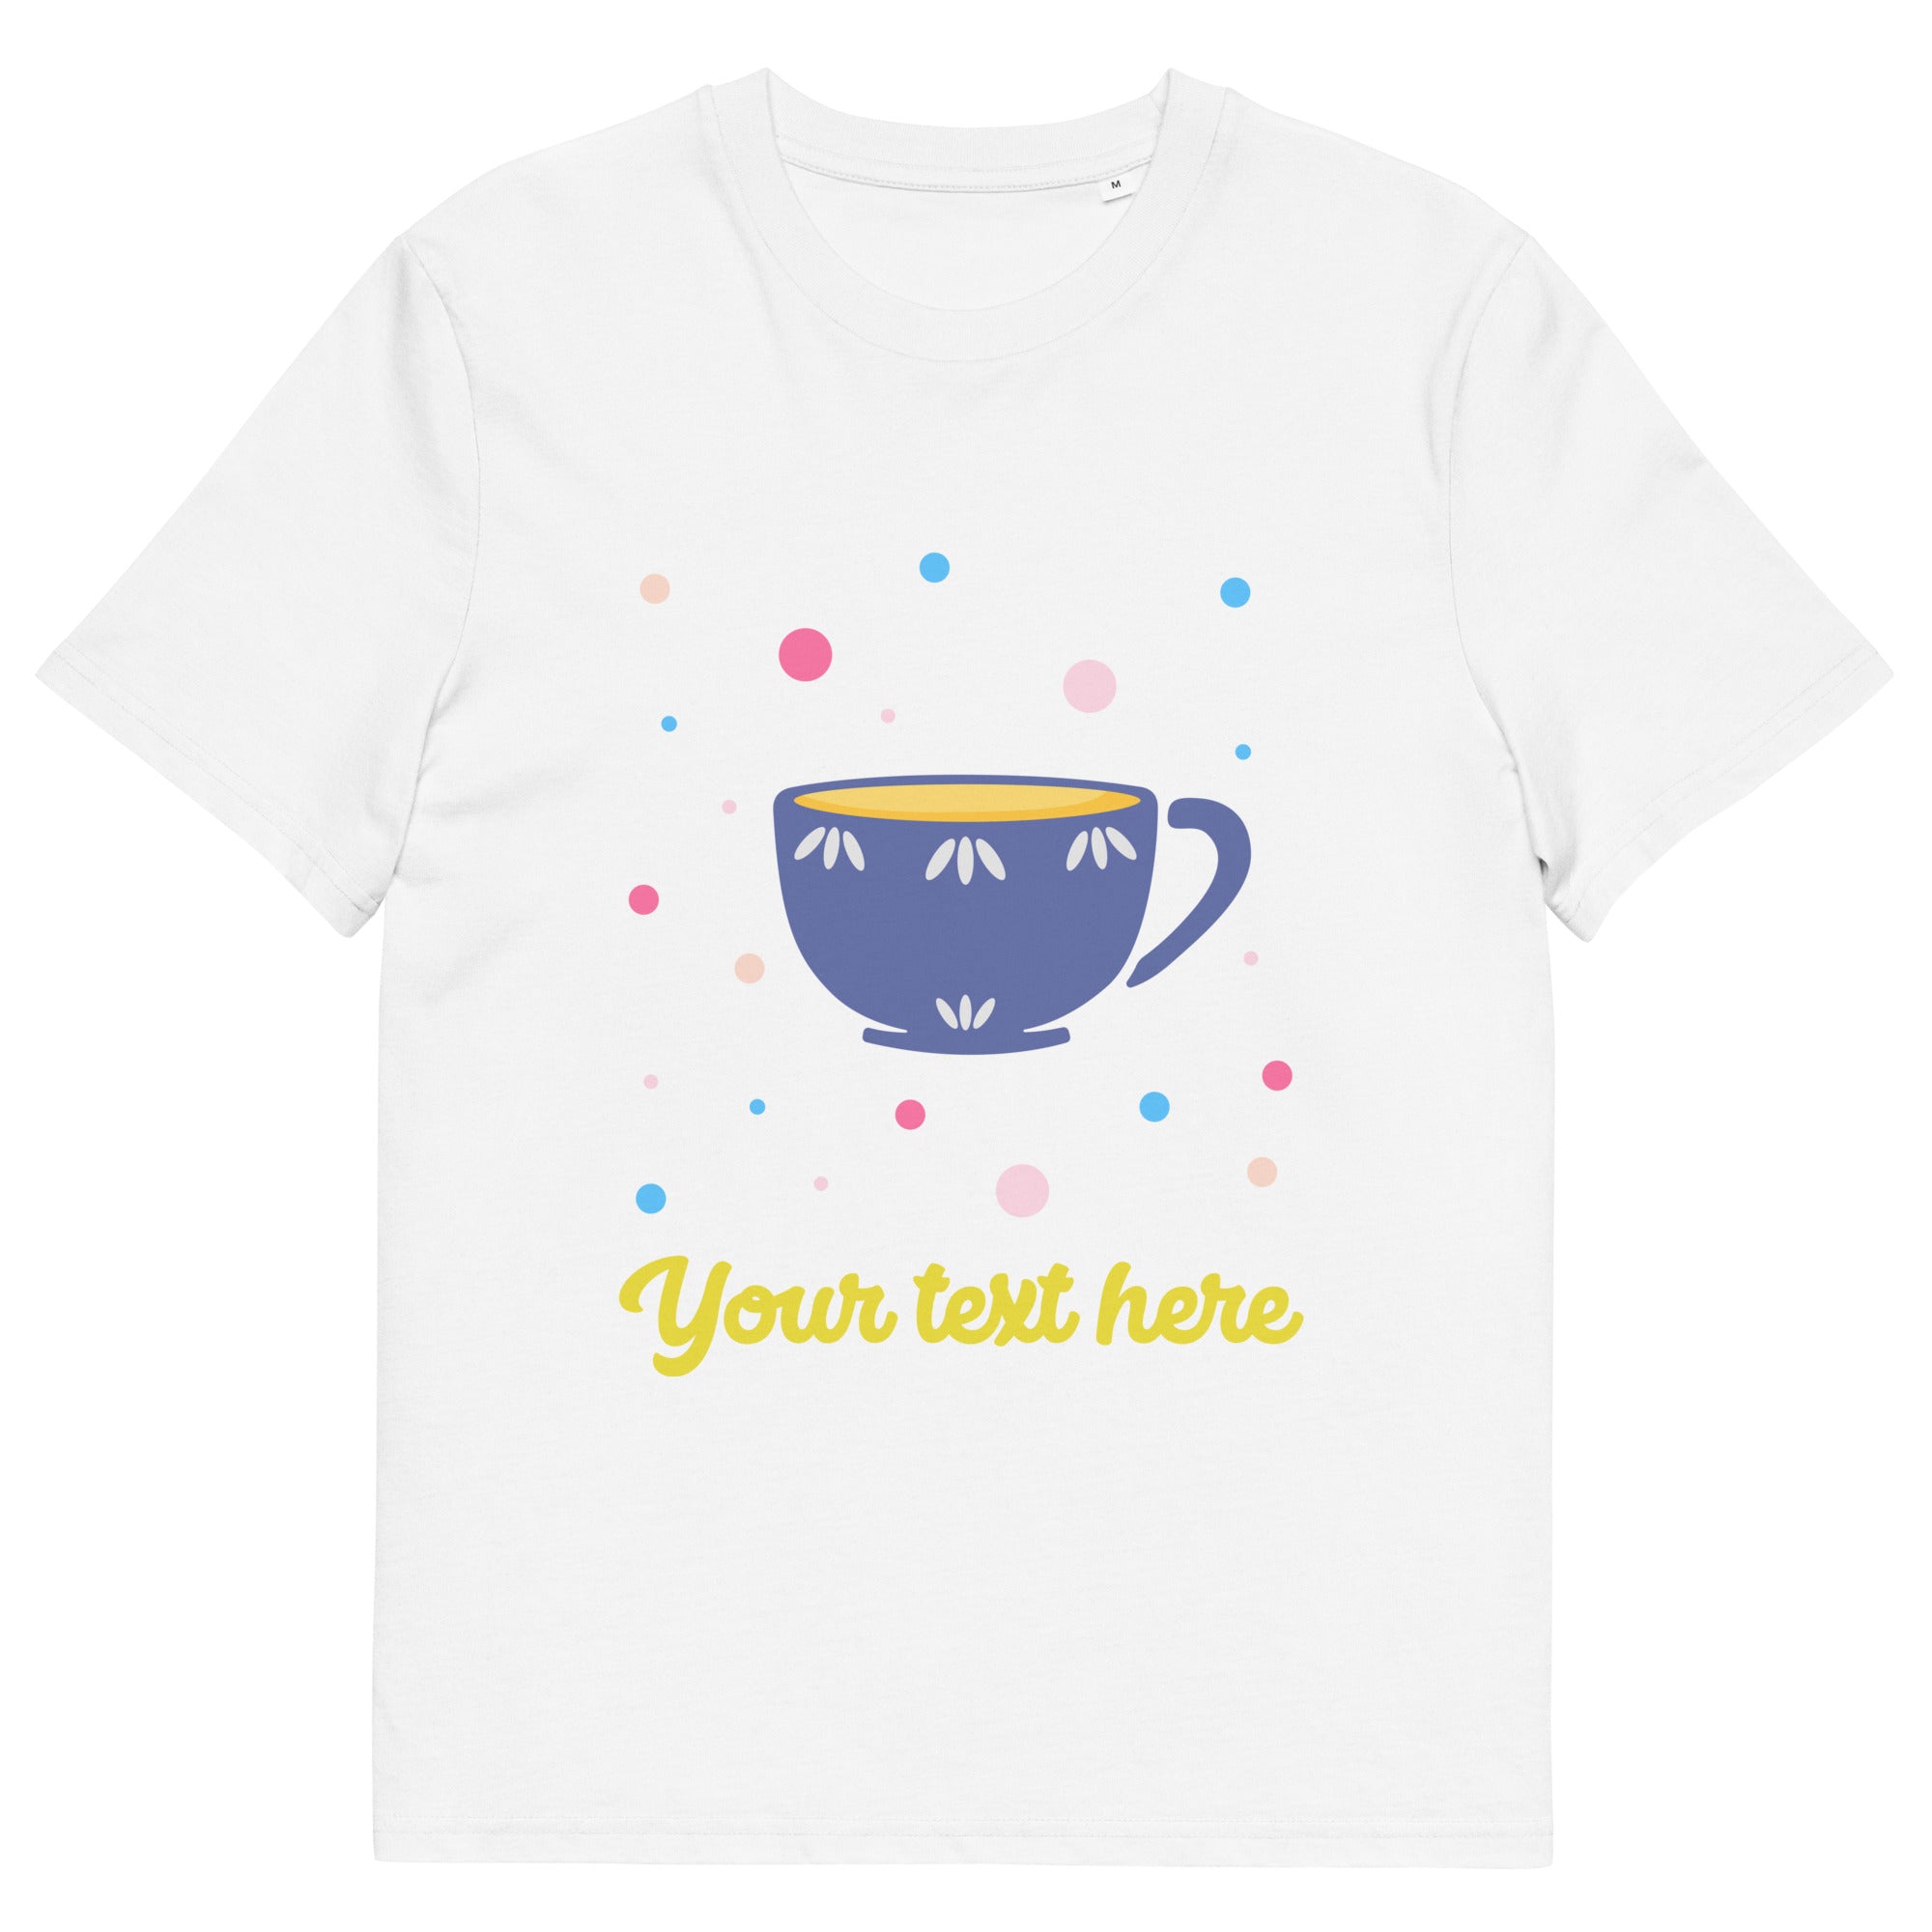 Personalised Custom Text - Organic Cotton Adults Unisex T-Shirt - London Doodles - Cup Of Tea - White